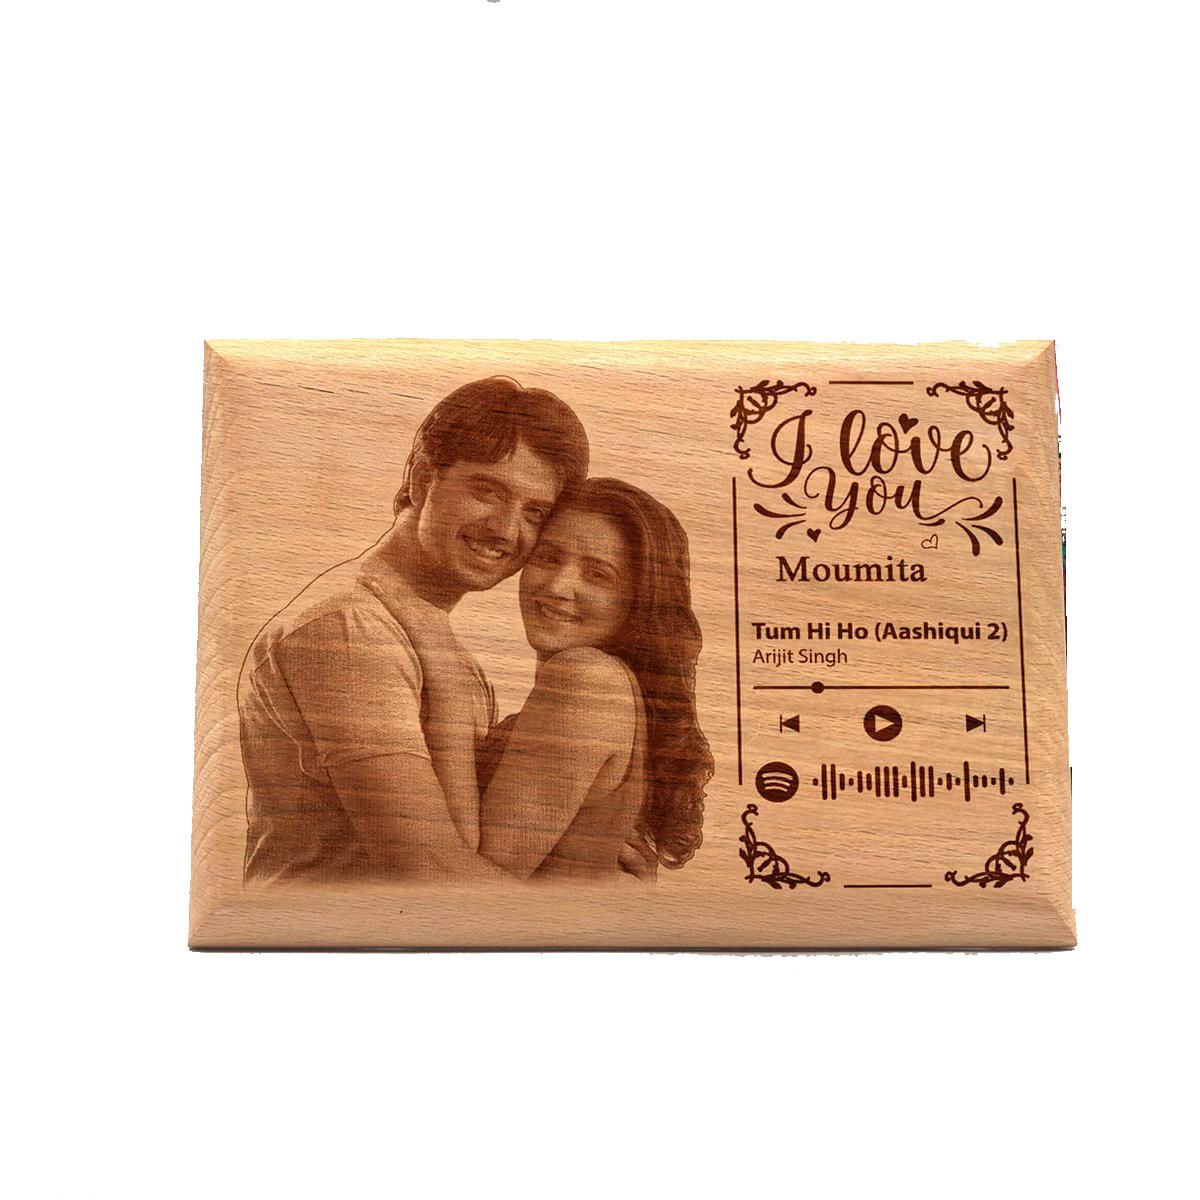 Laser Engraved Personalized Photo Wooden Plaque 6X9